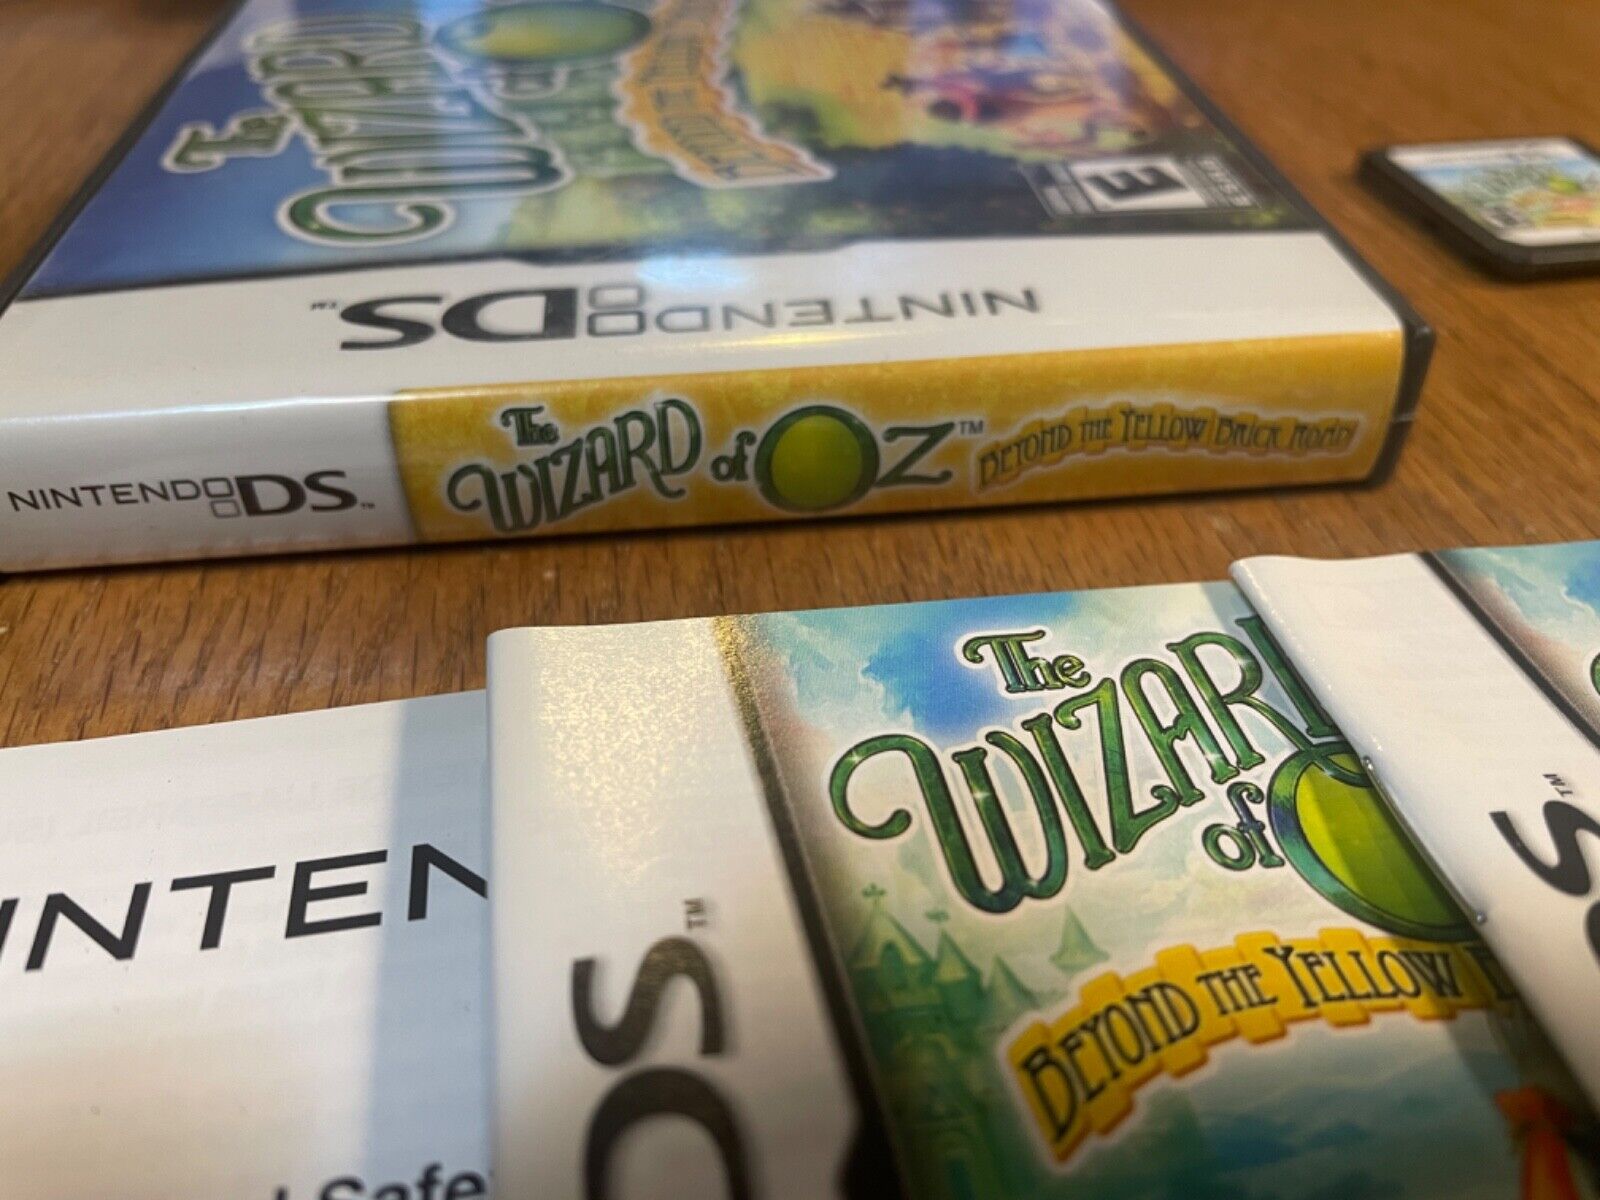 The Wizard of Oz Beyond Yellow Brick Road Nintendo DS Complete CIB Authentic